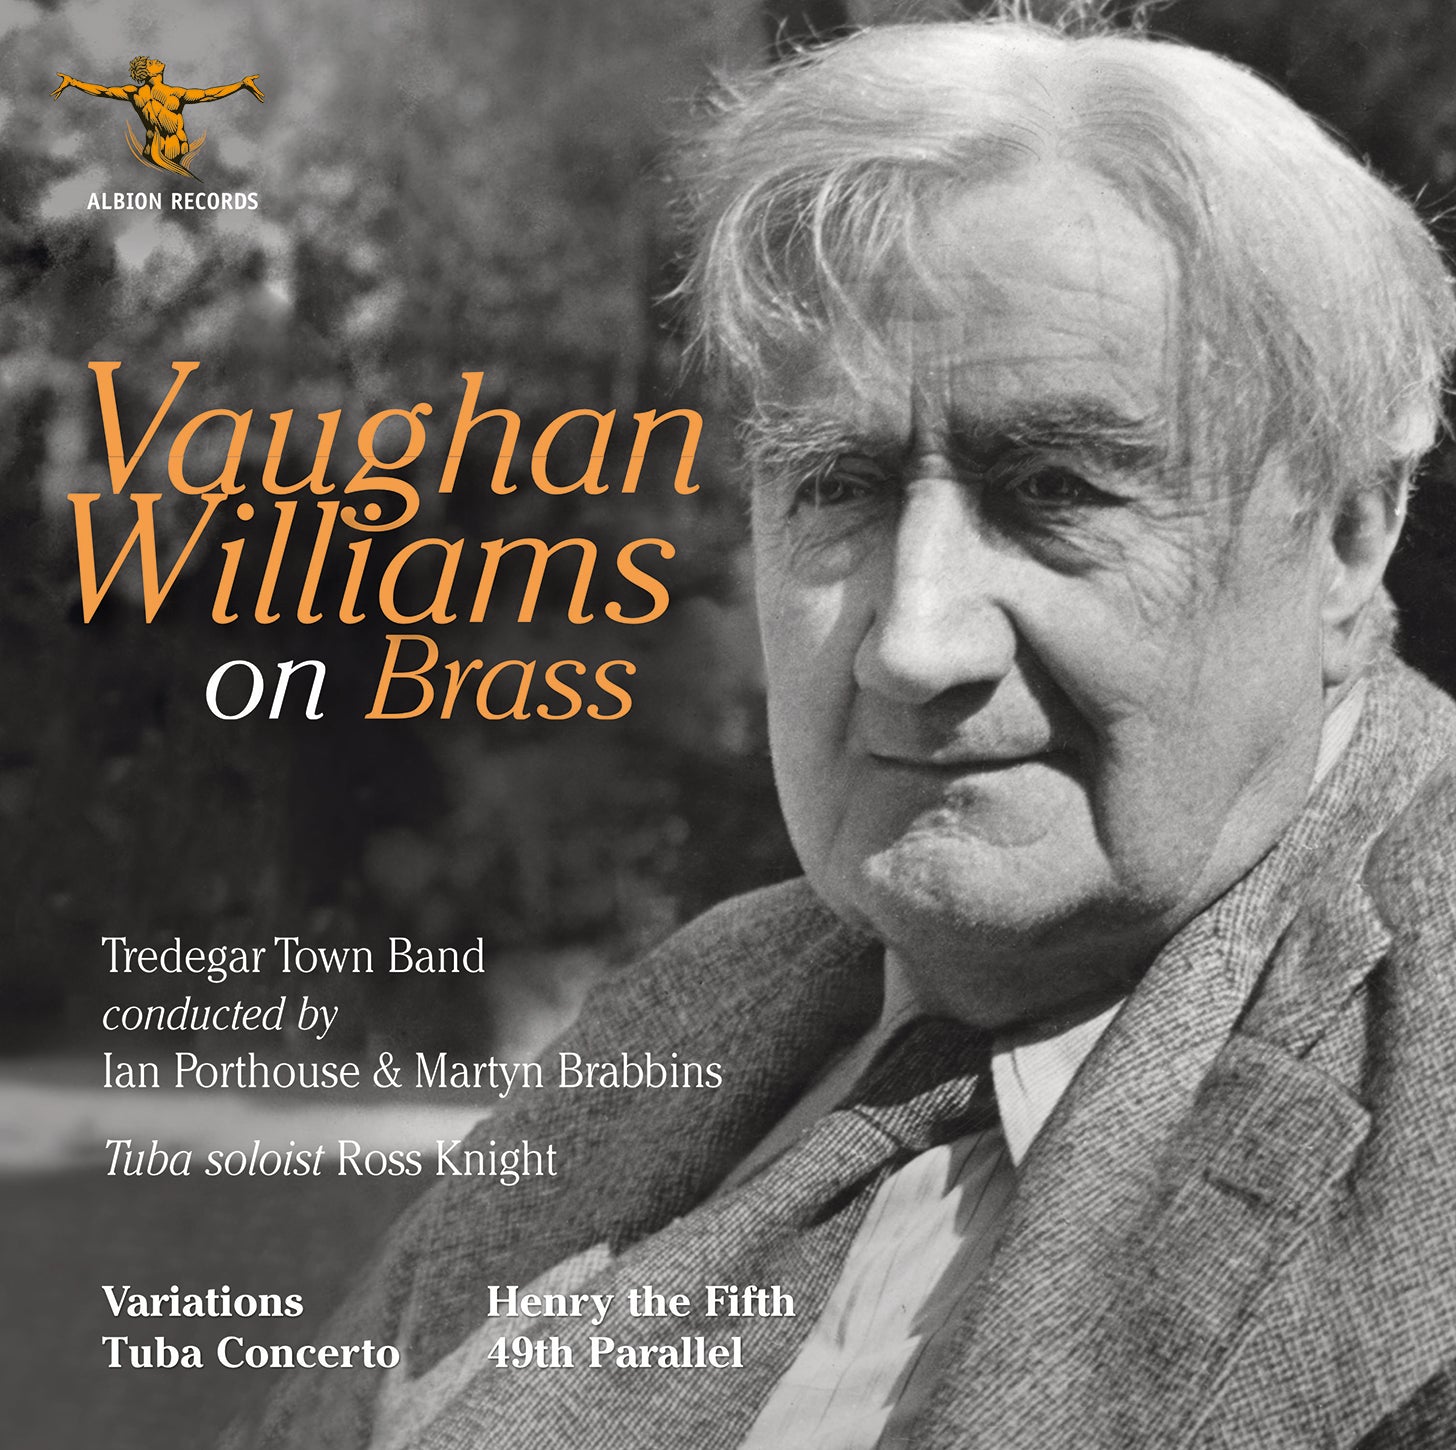 Vaughan Williams on Brass / Knight, Porthouse, Brabbins, Tredegar Town Band